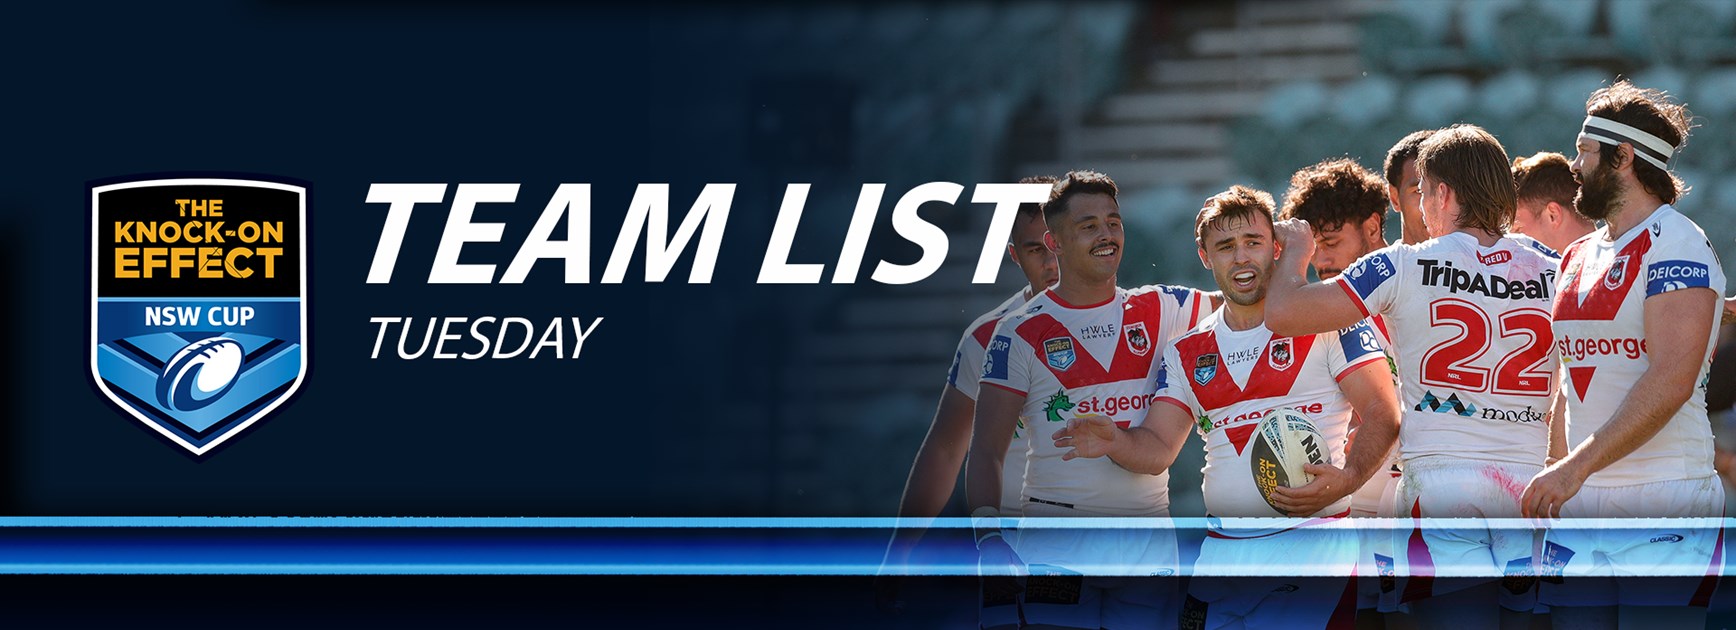 Team List Tuesday | The Knock-On Effect NSW Cup Round Seven